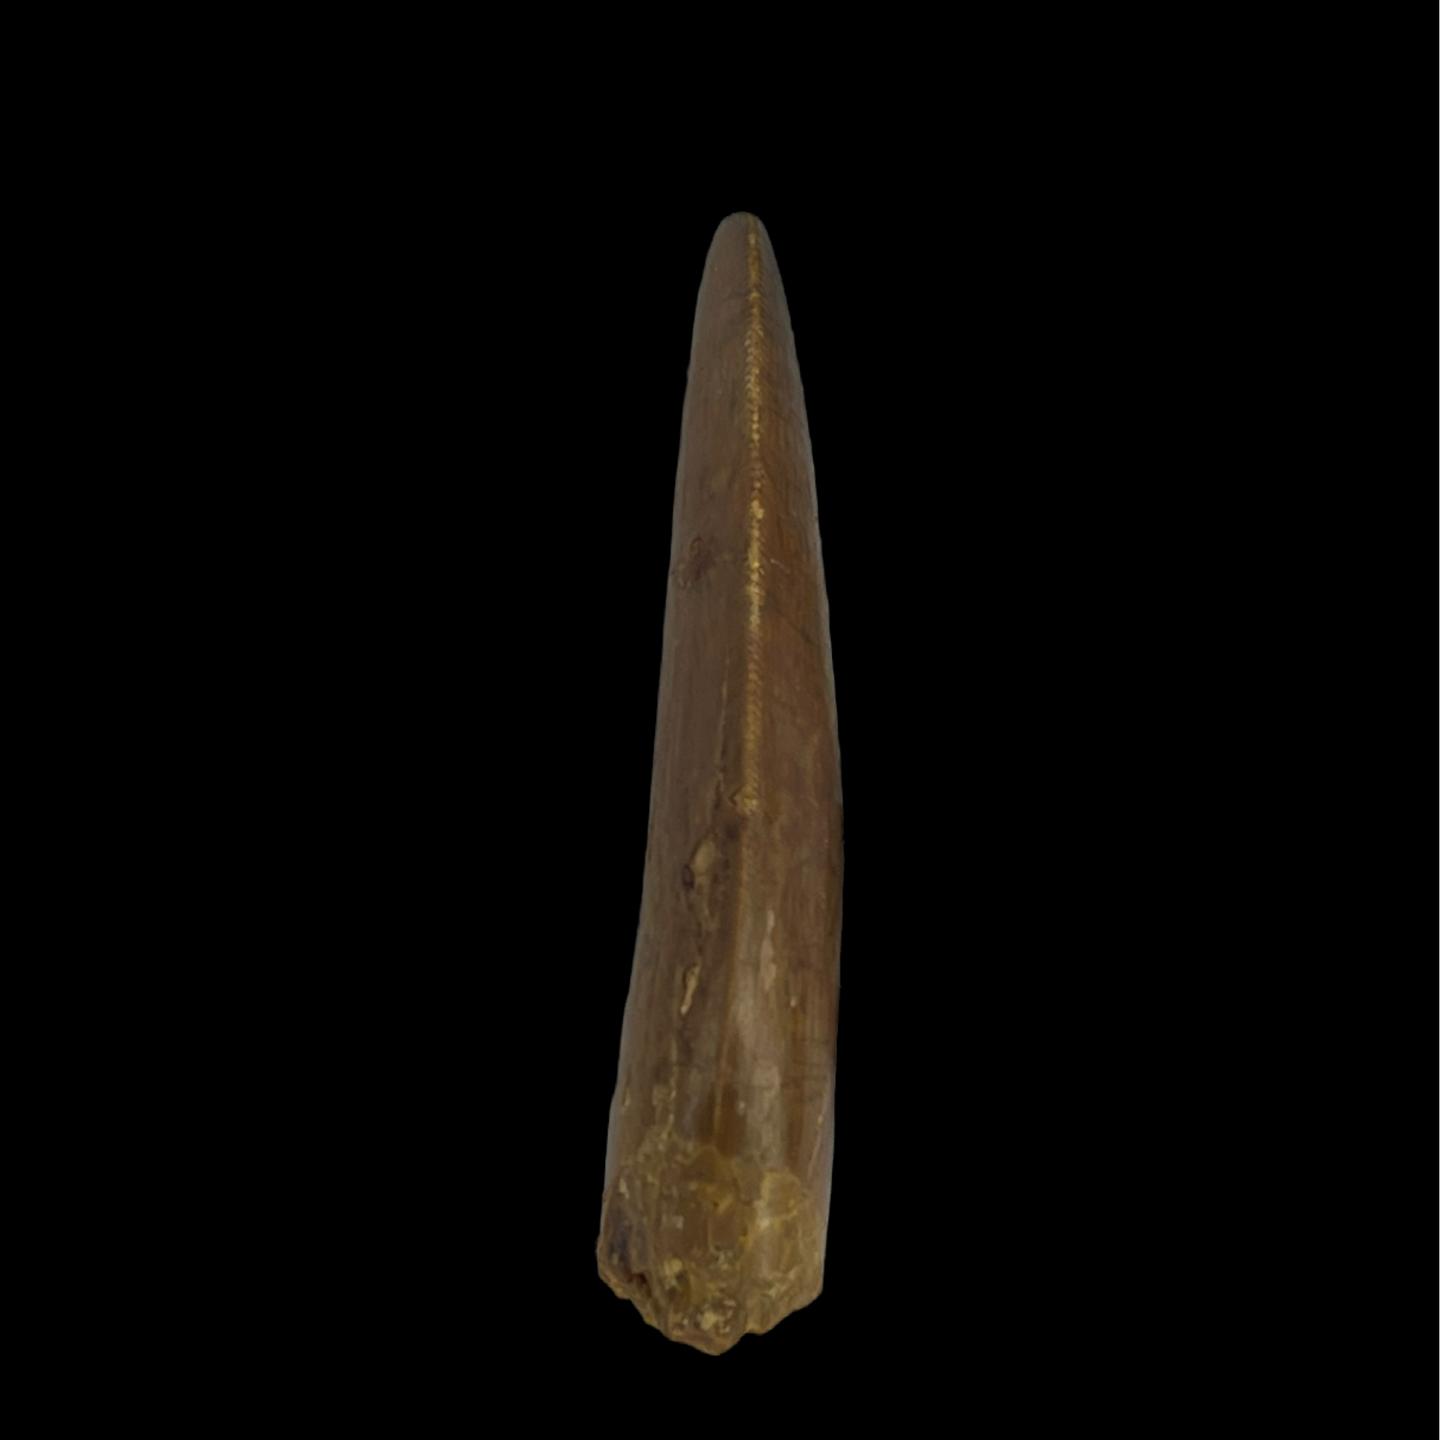 Carcharodontosaurus Tooth 11 (2.5 in)